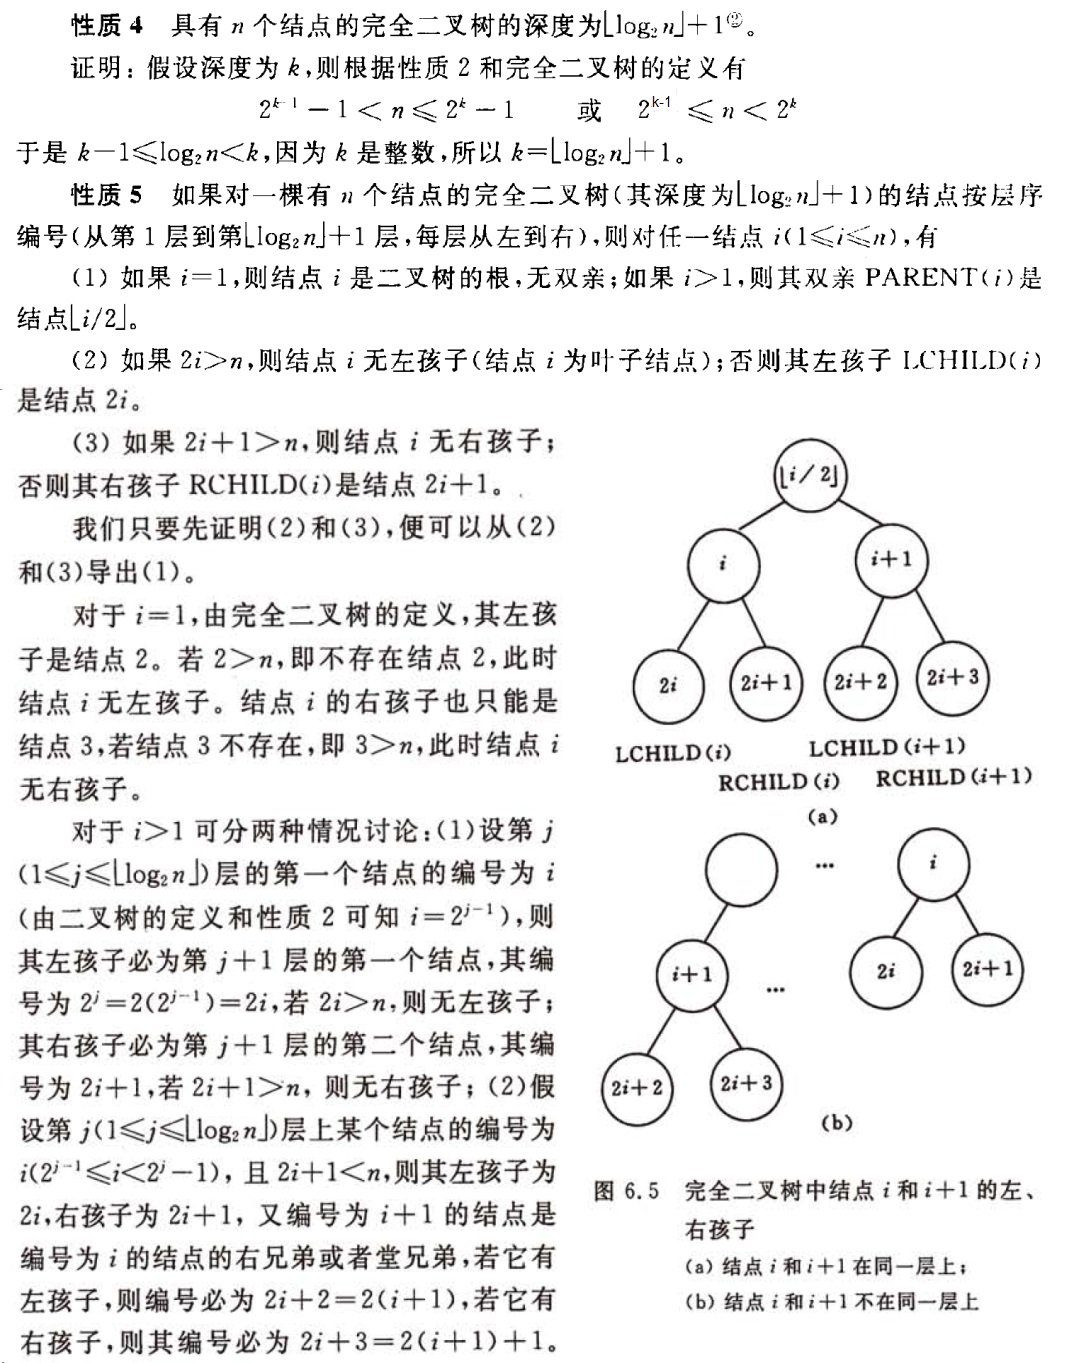 ds-tree-feature2